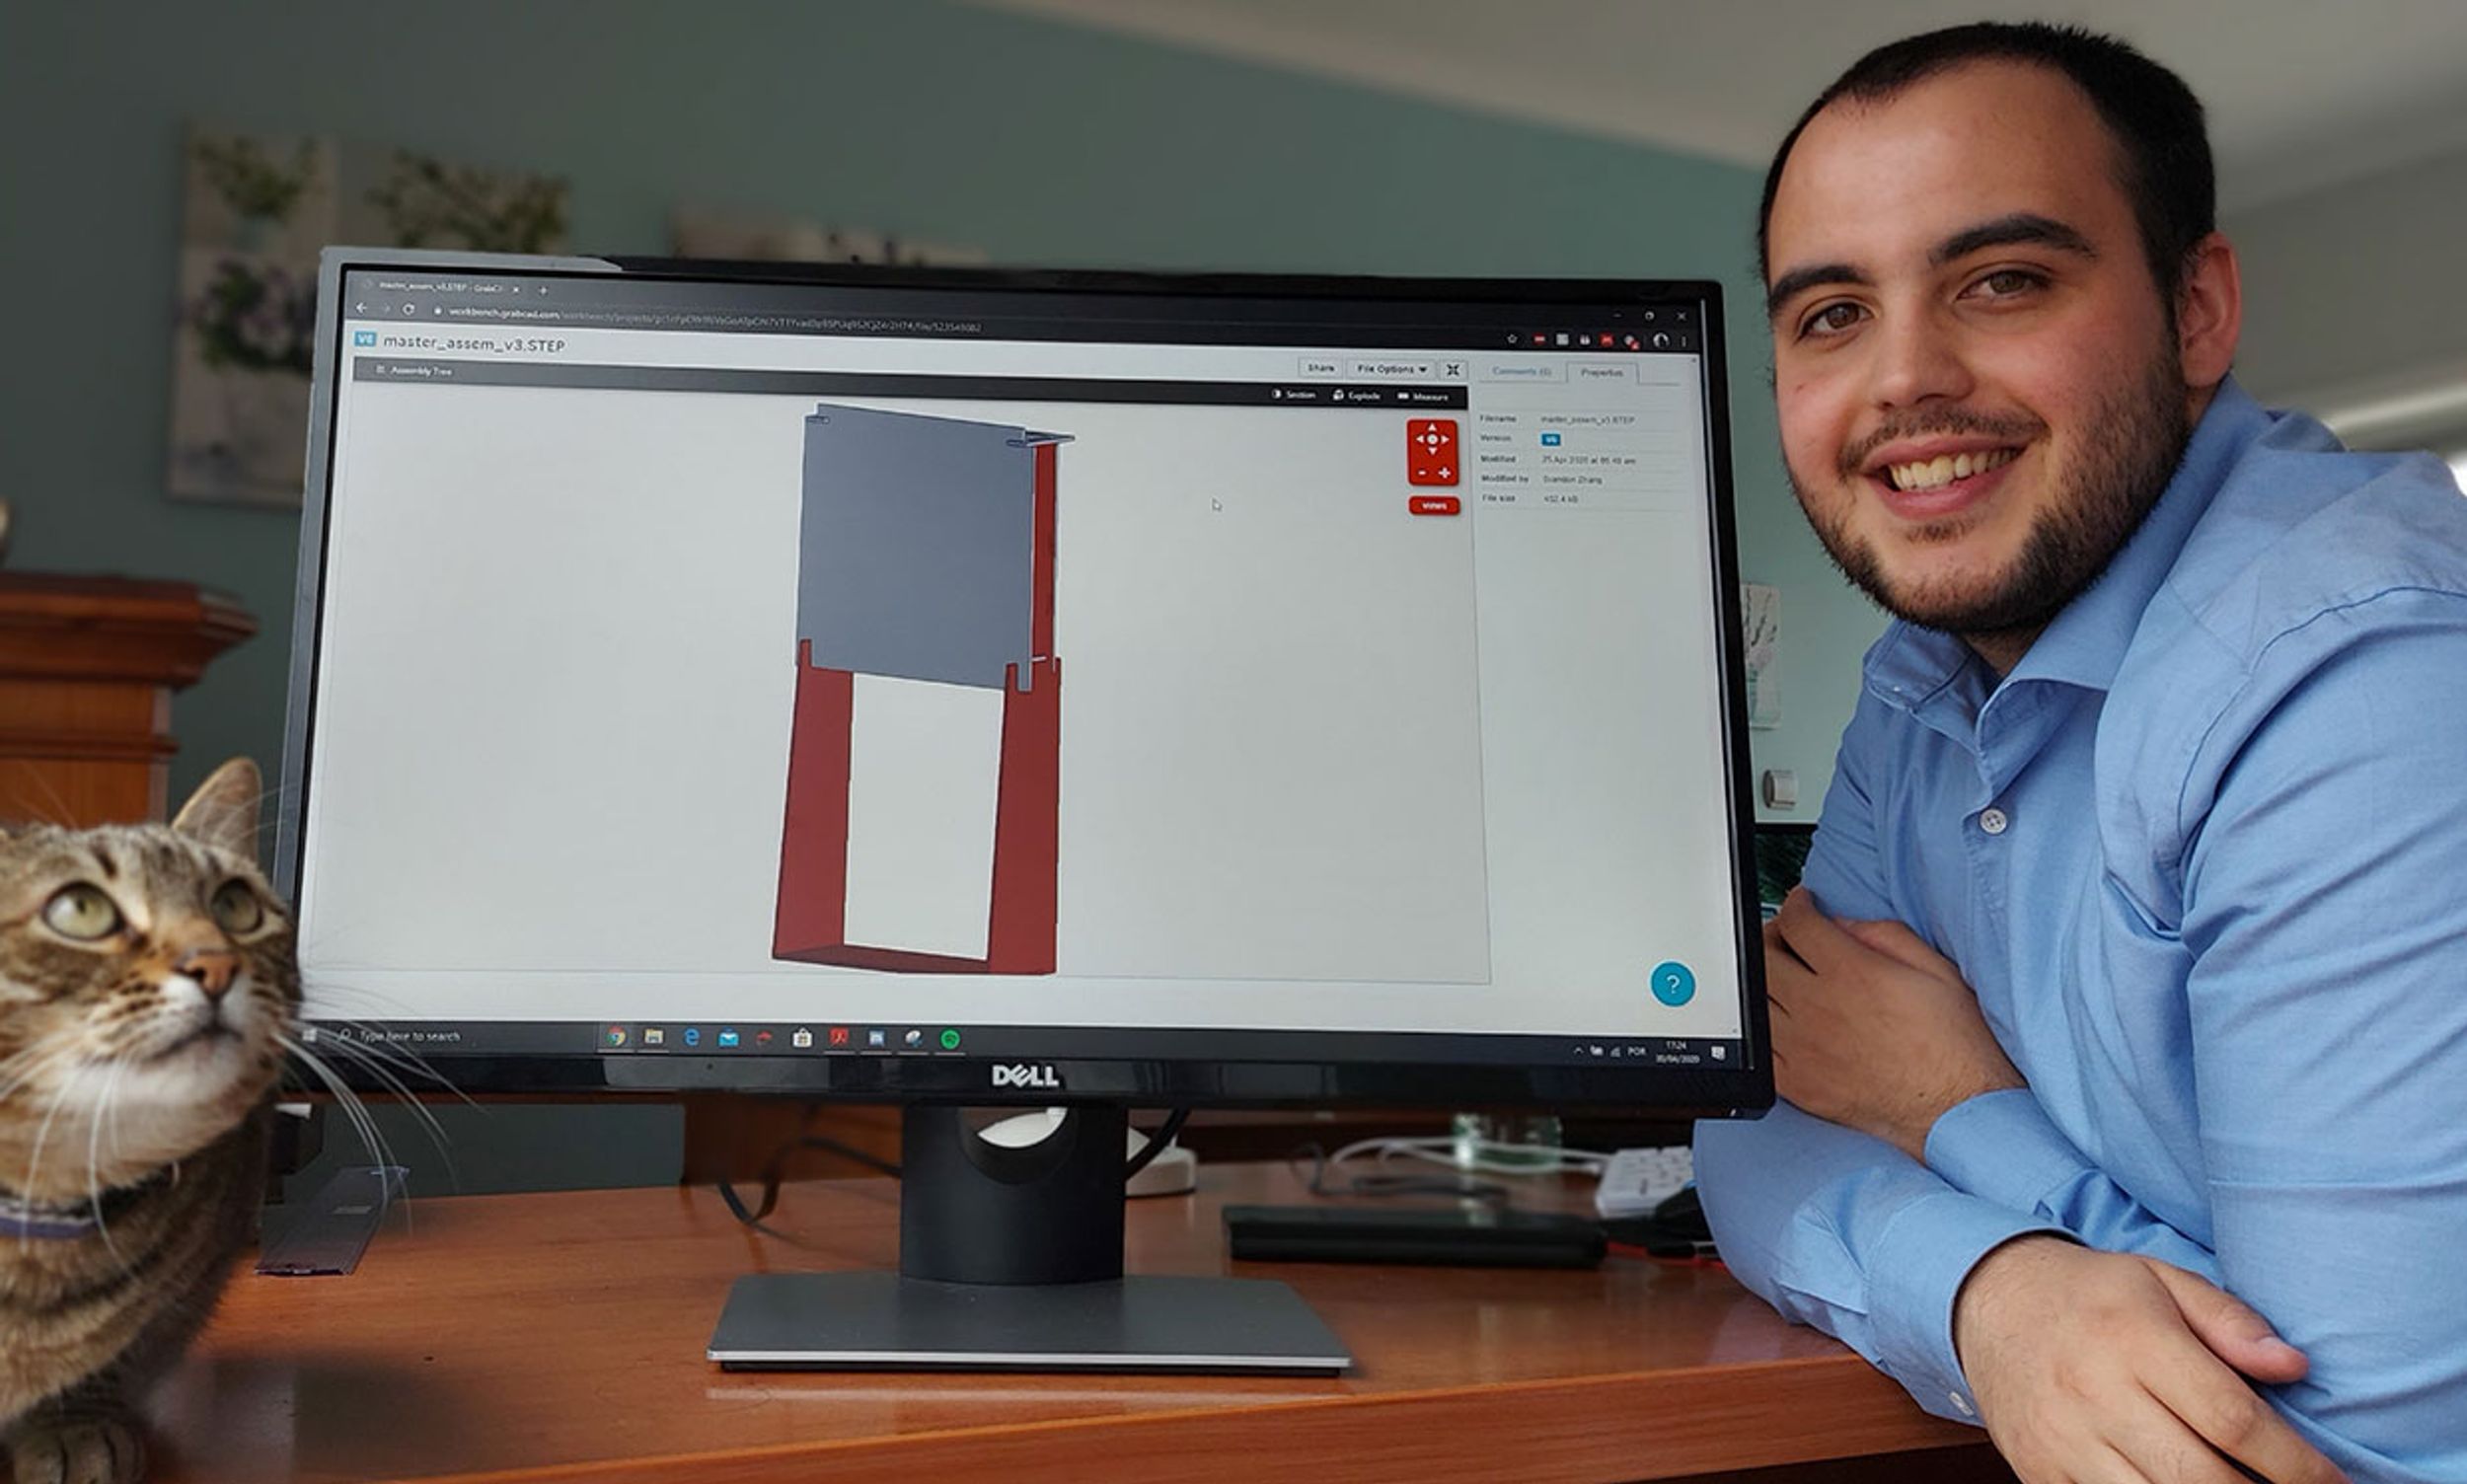 IEEE Student Member Pedro Brandao, a Ph.D. candidate at the University of Porto in Portugal, working on the design of the temperature screening device.